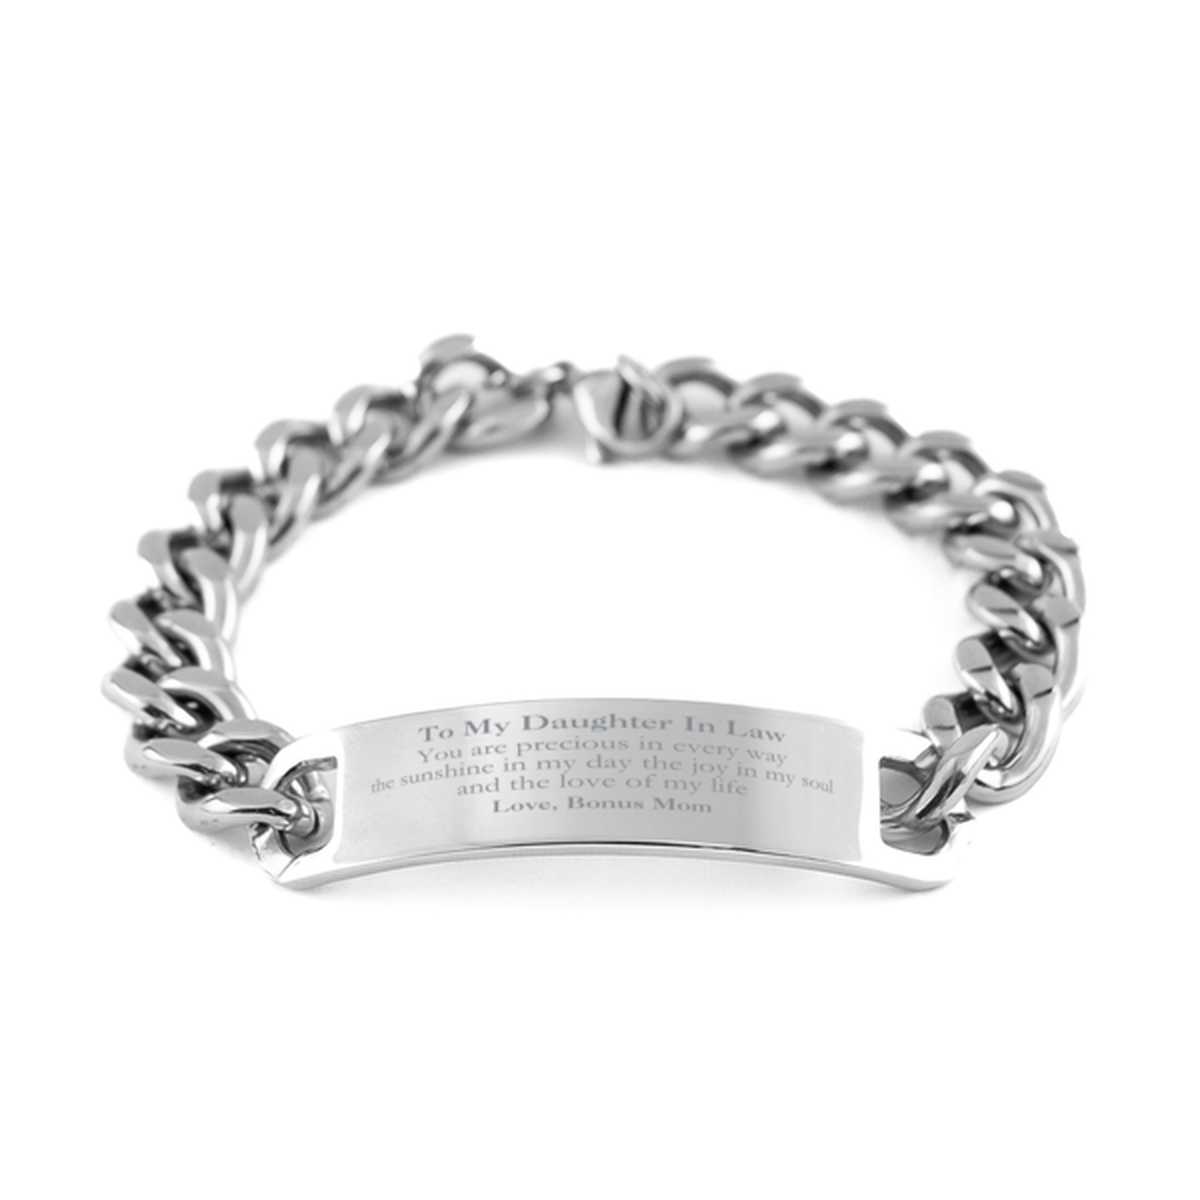 Graduation Gifts for Daughter In Law Cuban Chain Stainless Steel Bracelet Present from Bonus Mom, Christmas Daughter In Law Birthday Gifts Daughter In Law You are precious in every way the sunshine in my day. Love, Bonus Mom